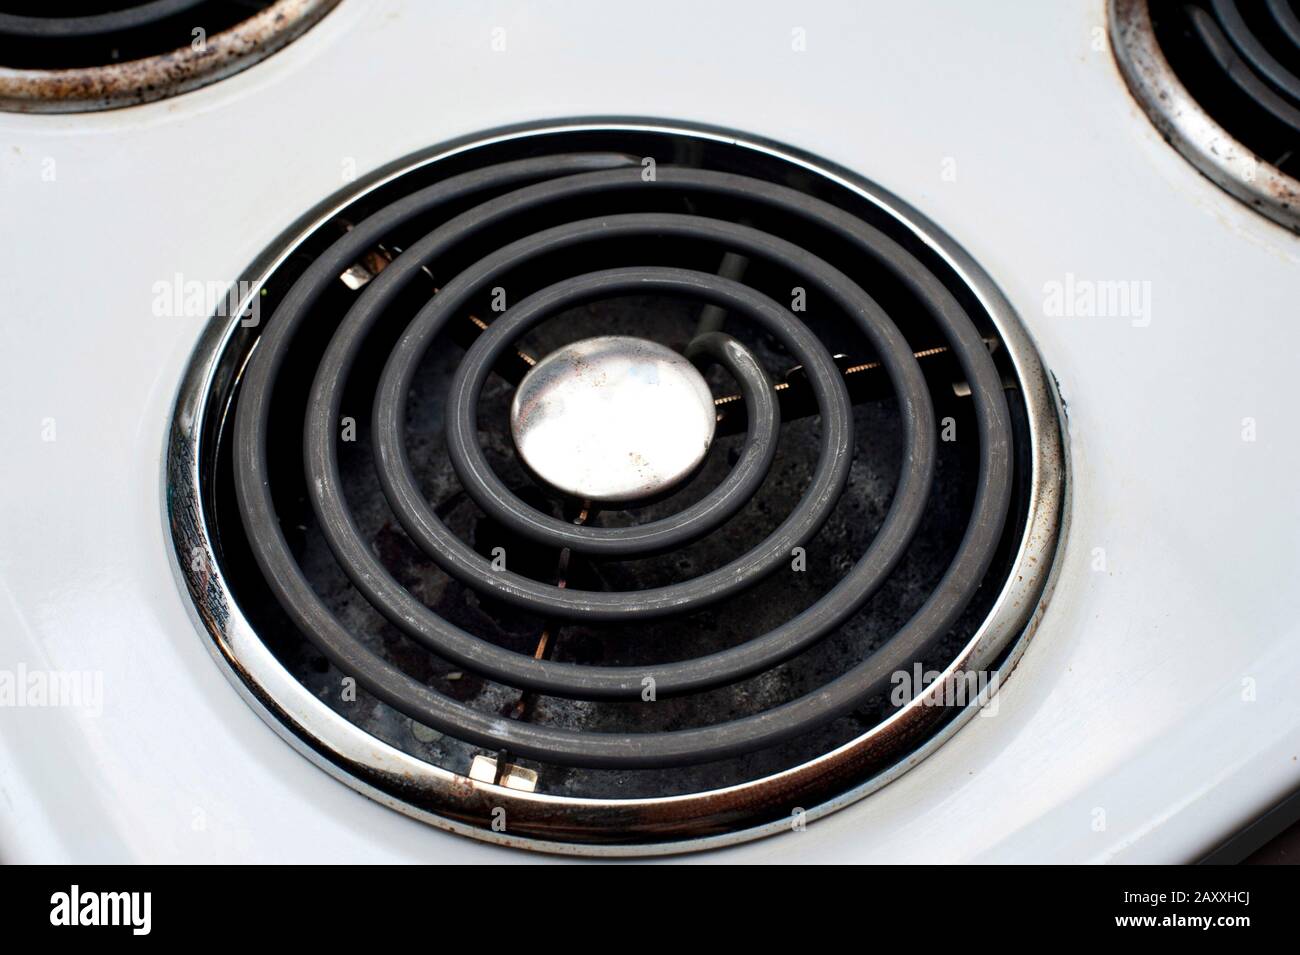 https://c8.alamy.com/comp/2AXXHCJ/spiral-hotplate-heating-element-on-top-of-an-electric-domestic-stove-for-cooking-food-2AXXHCJ.jpg